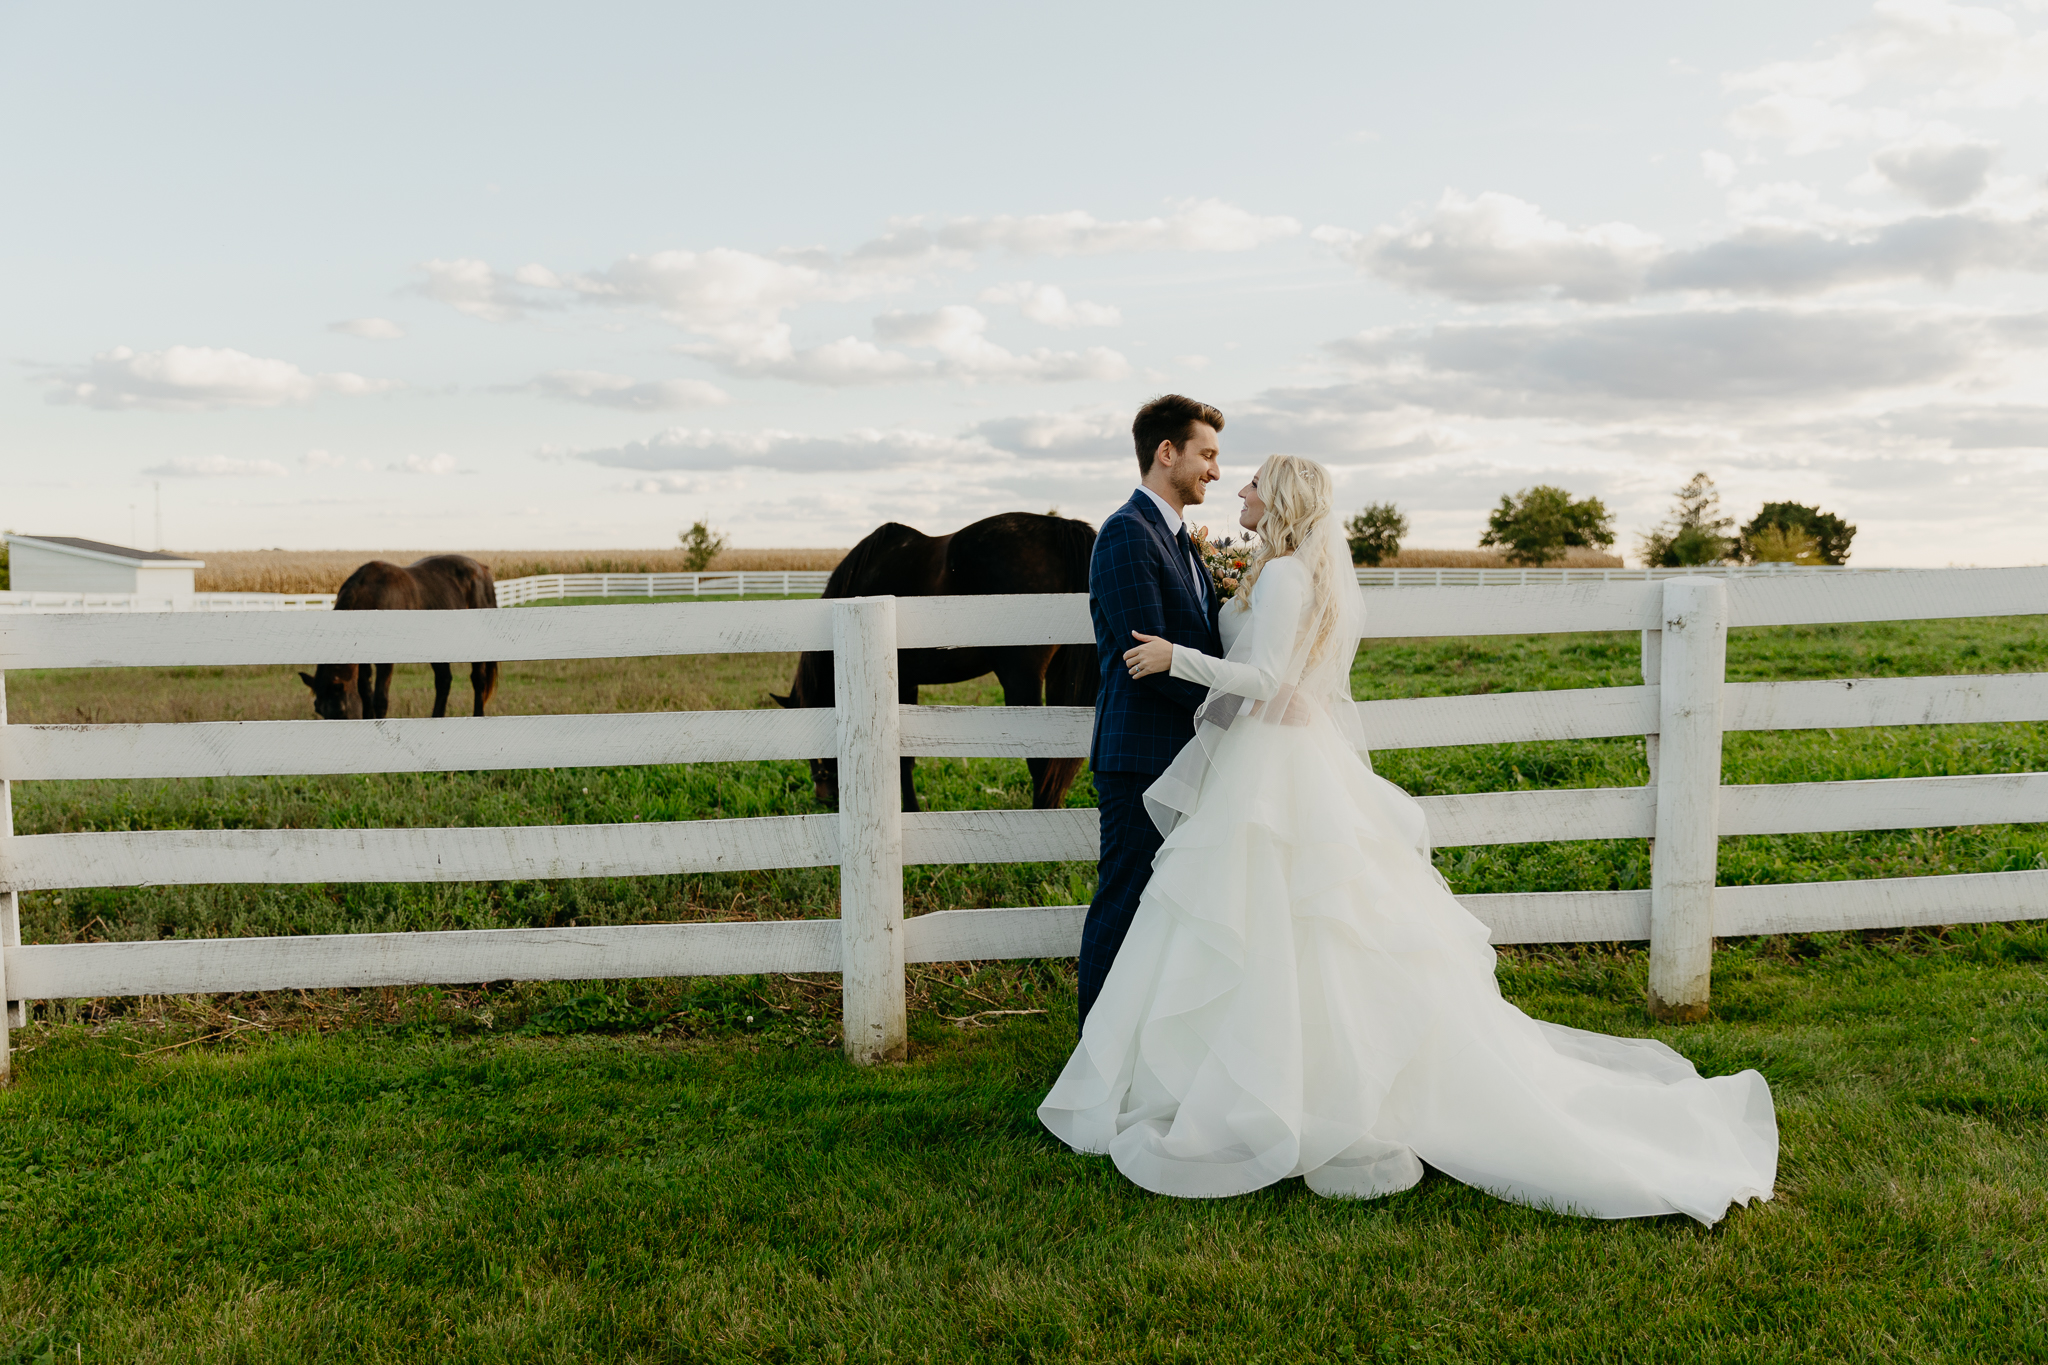 Bride and groom embrace and kiss next to a pasture with two brown horses, at Northfork Farm